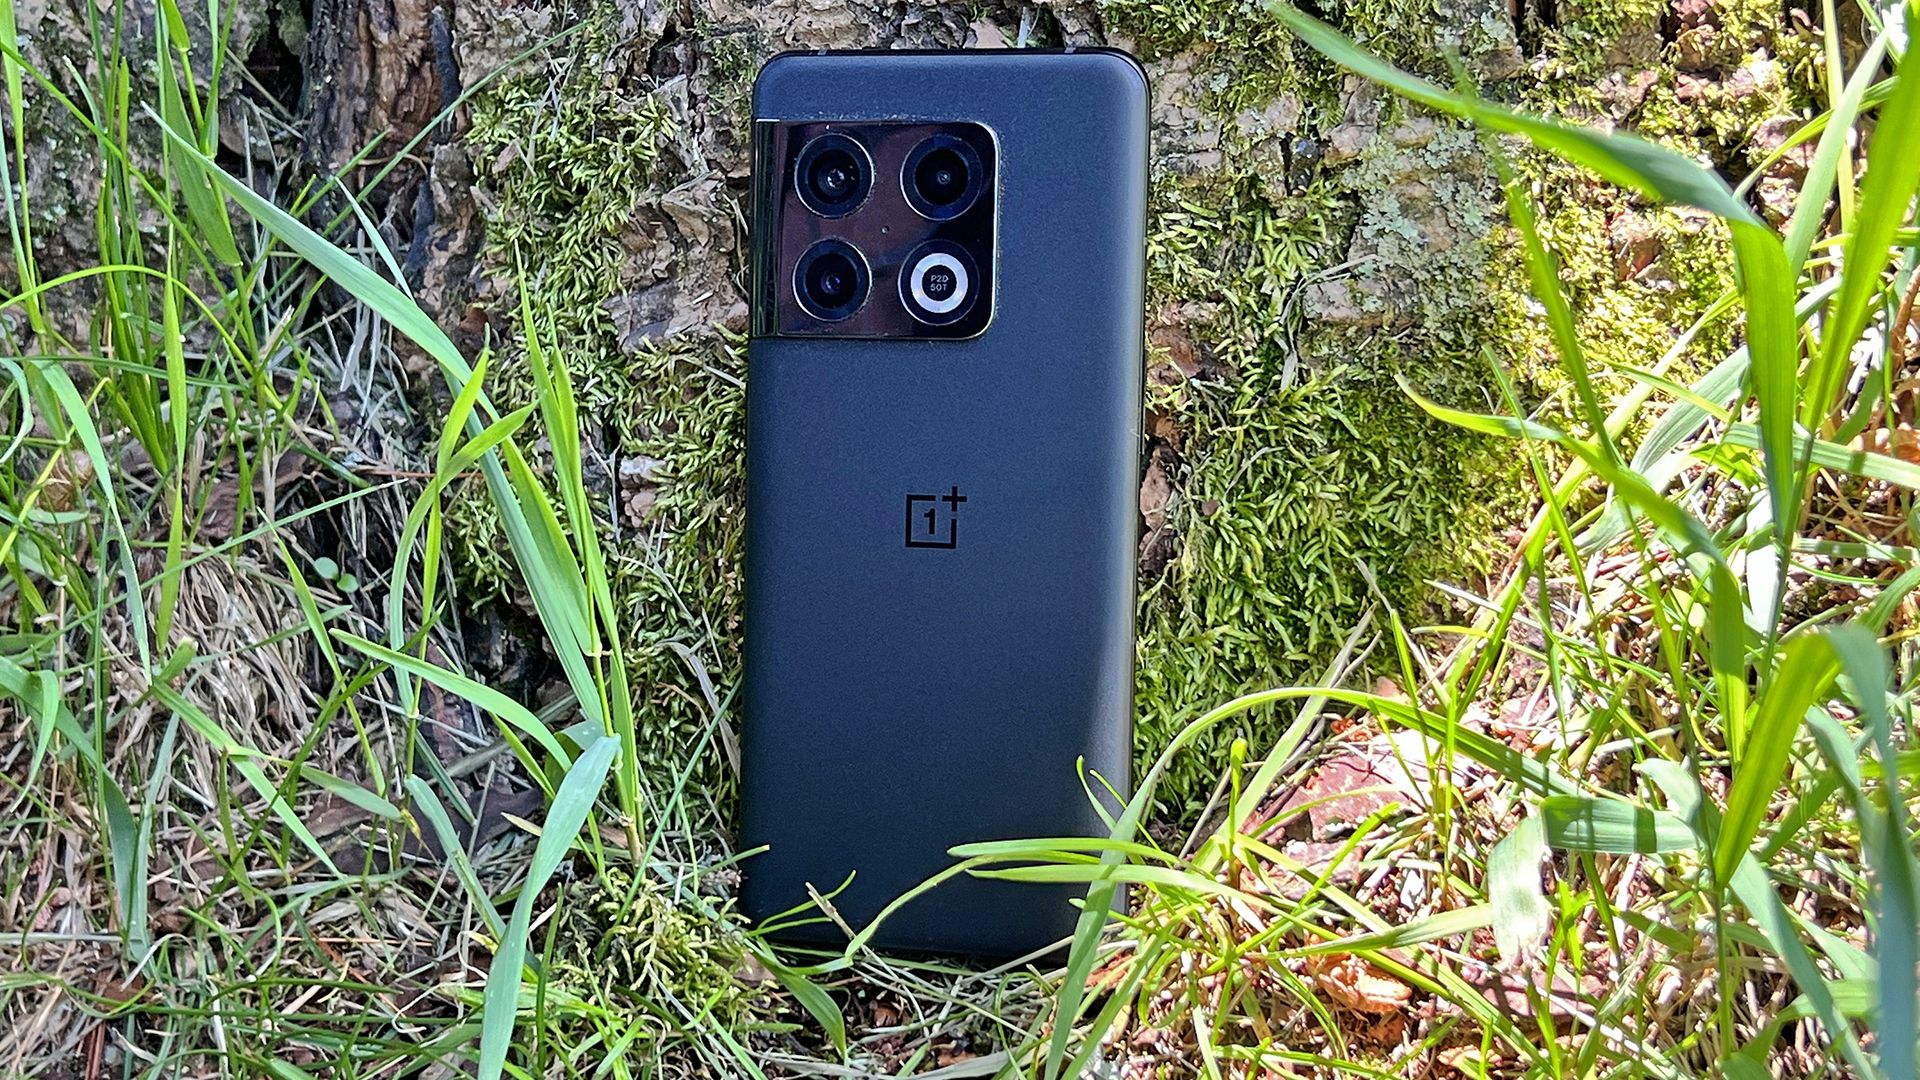 The back of the OnePlus phone showing the camera array